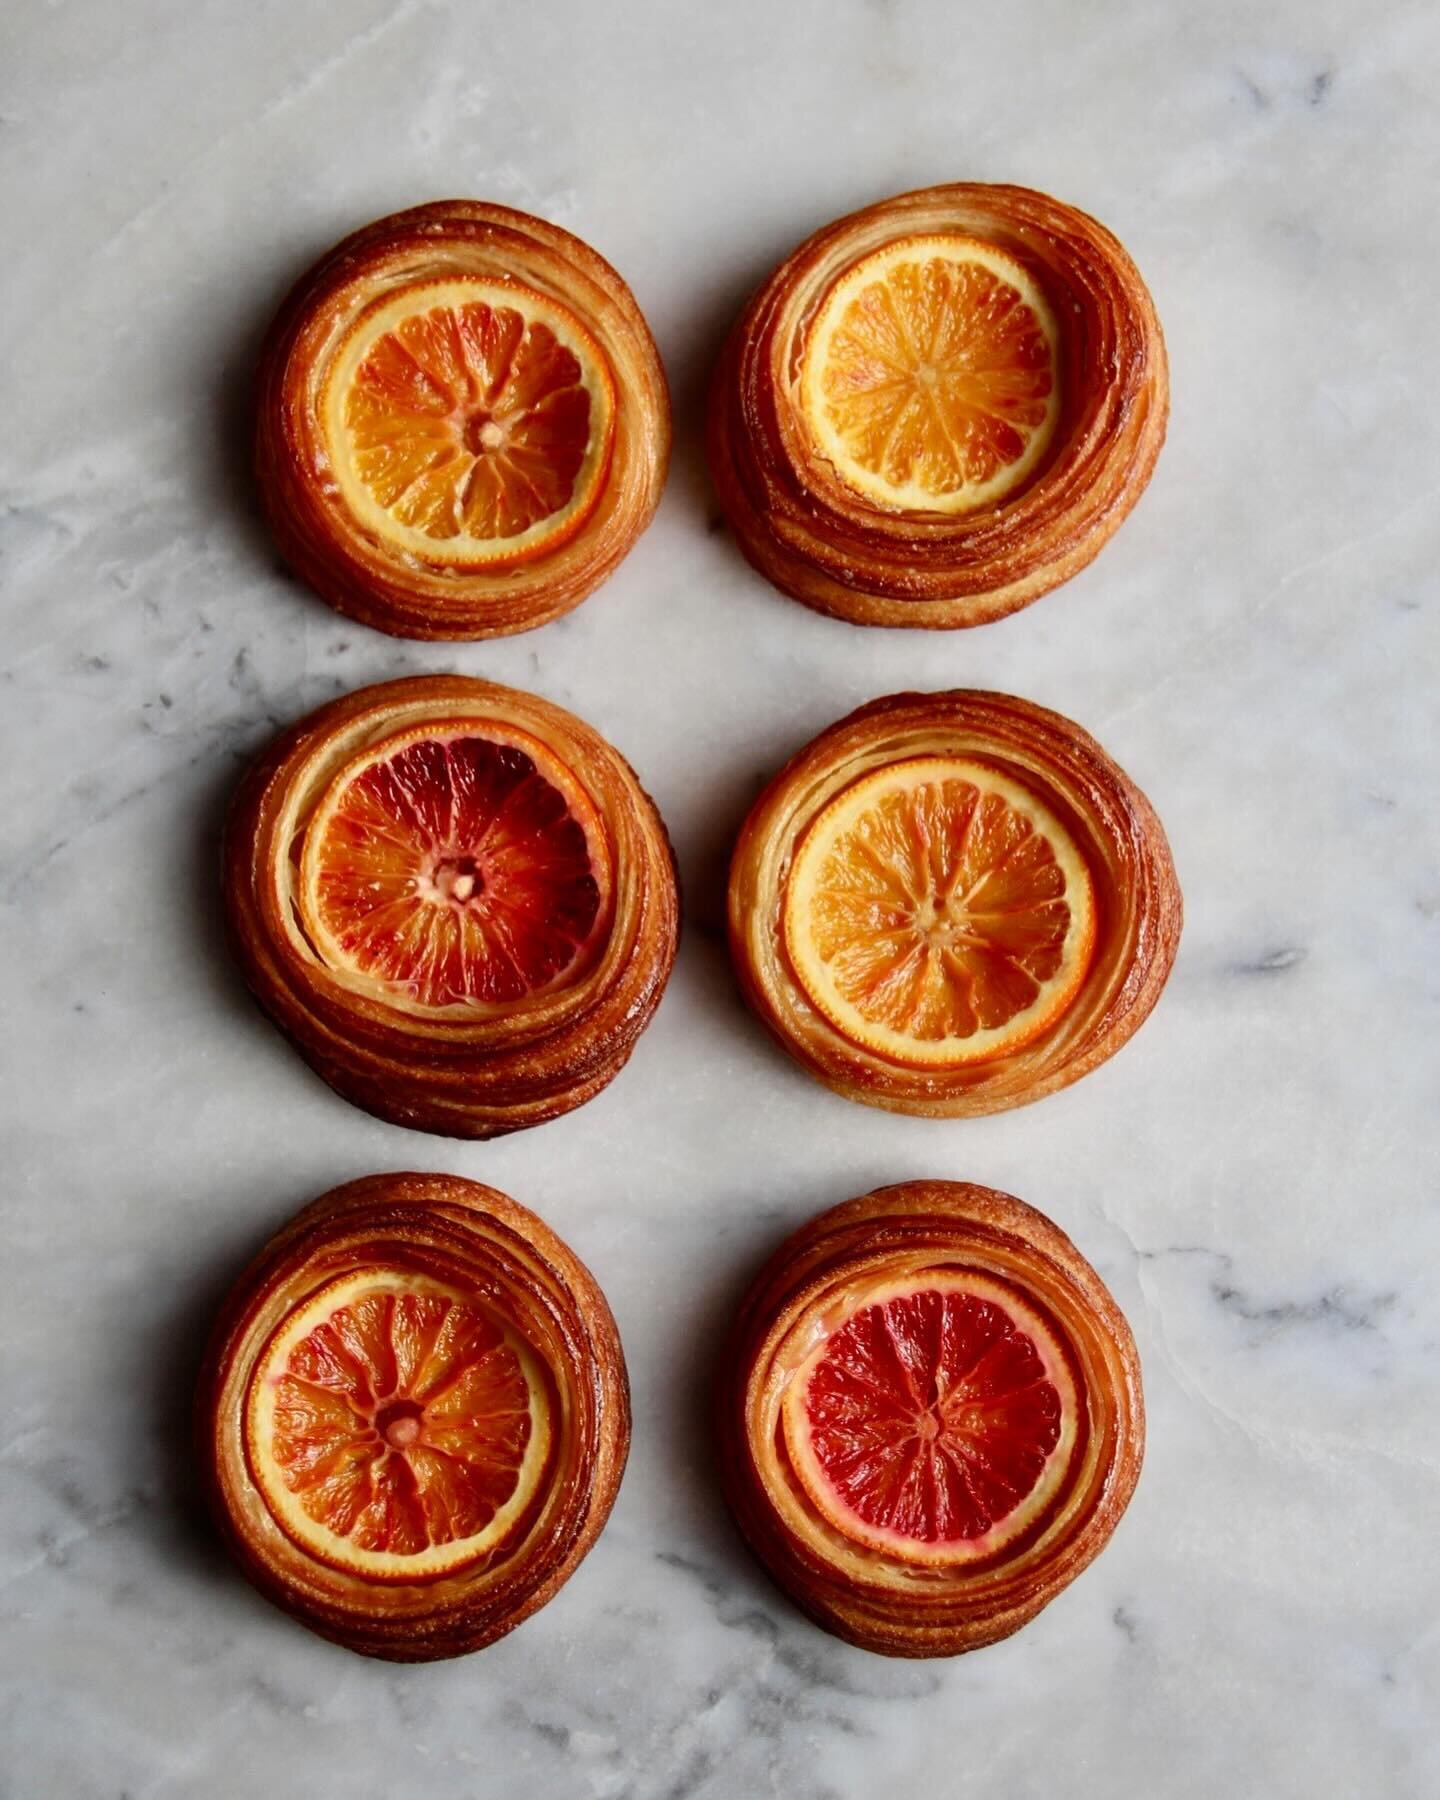 What a joy to make seasonal products, especially after a cold winter.

We made a wonderful sweet, slightly bitter marmalade from organic oranges. We use it also as a base for our Orange Pastry. 
Expect a crispy laminated dough, to which we combine th